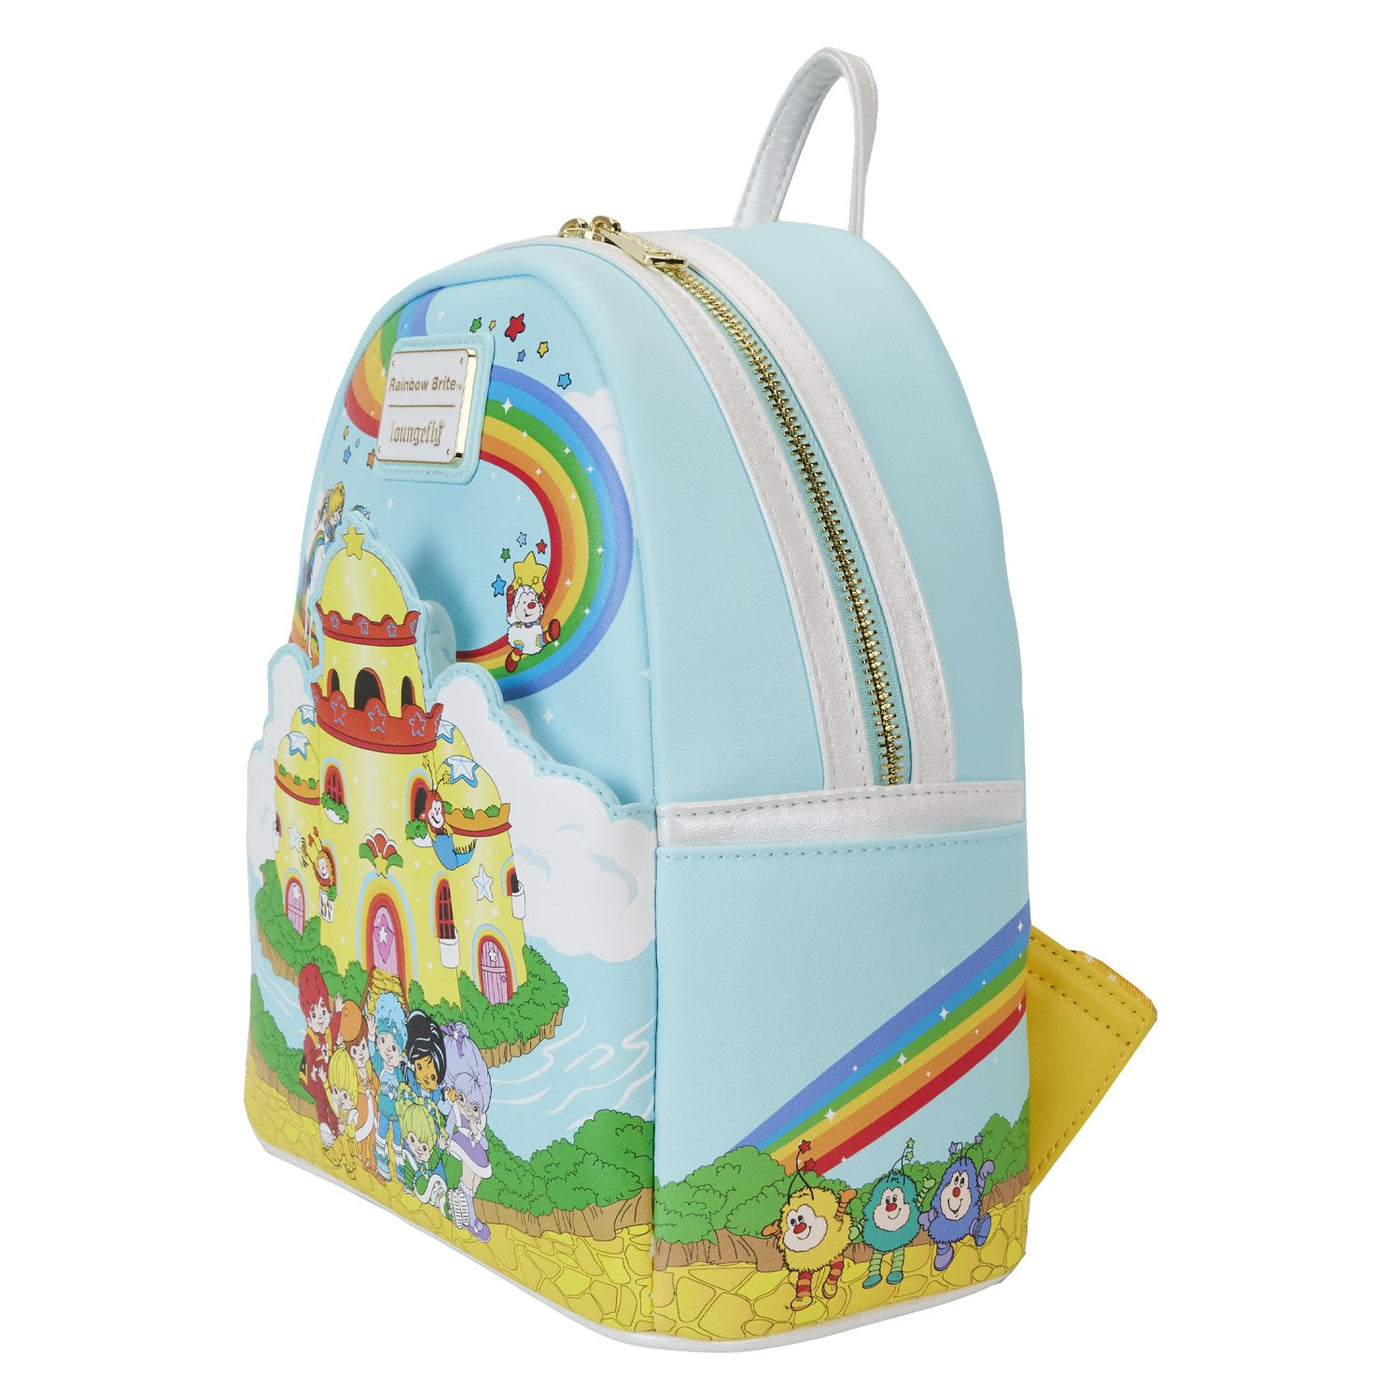 Loungefly Hallmark Rainbow Brite Castle Group Mini Backpack - Side View